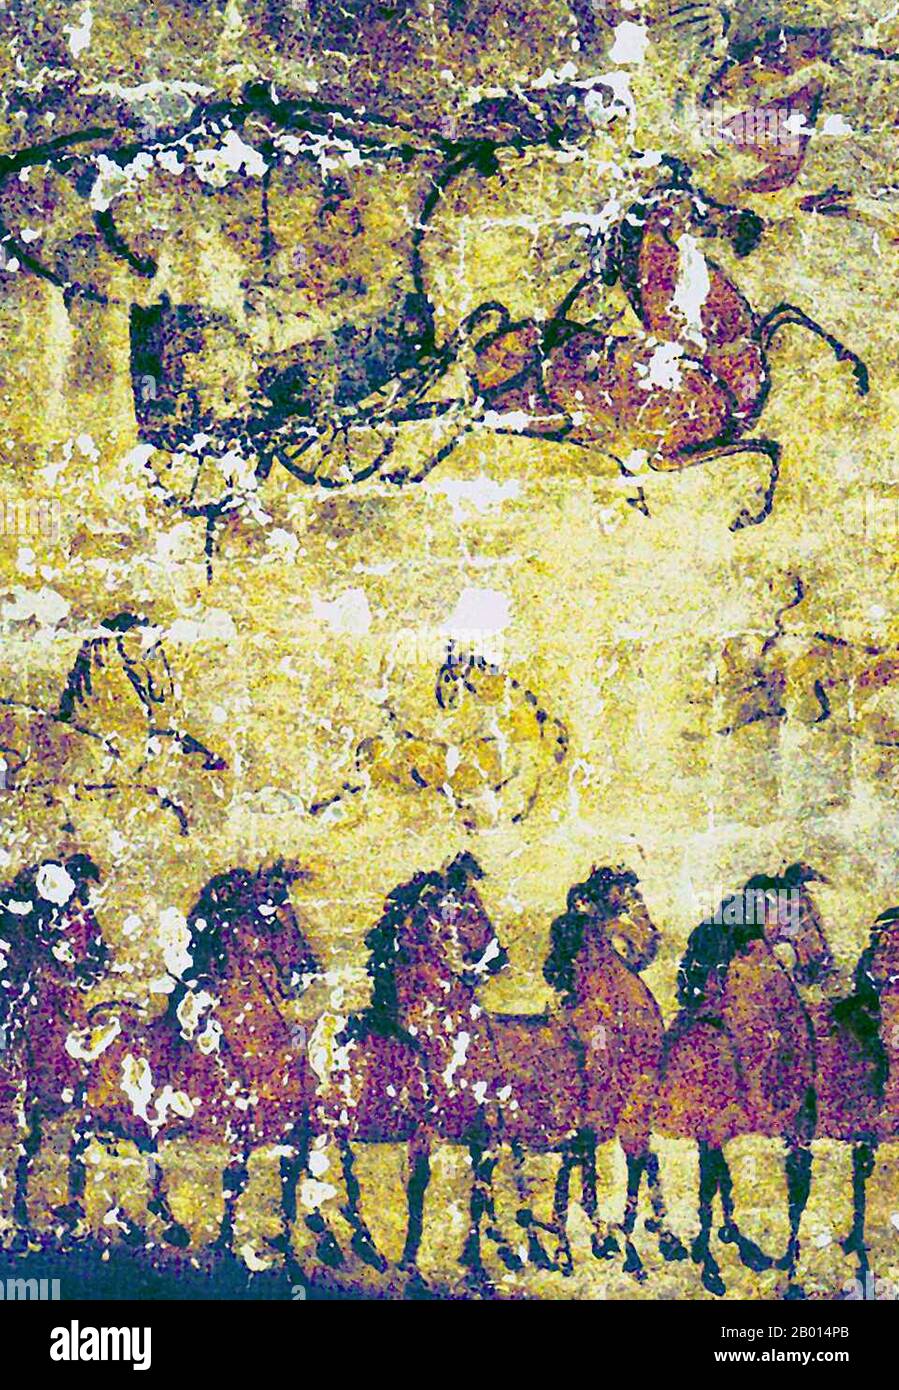 China: Han Dynasty tomb mural of horse and chariot, c.100 CE.  Eastern Han Dynasty (23-220 CE) mural of a group of horses and a horse pulling a covered chariot and rider. One of 57 murals from the Nei Menggu Helingeer/Holingor Tomb in Inner Mongolia, the tomb of a prominent official, landowner, and colonel of the Wuhuan Army. Stock Photo